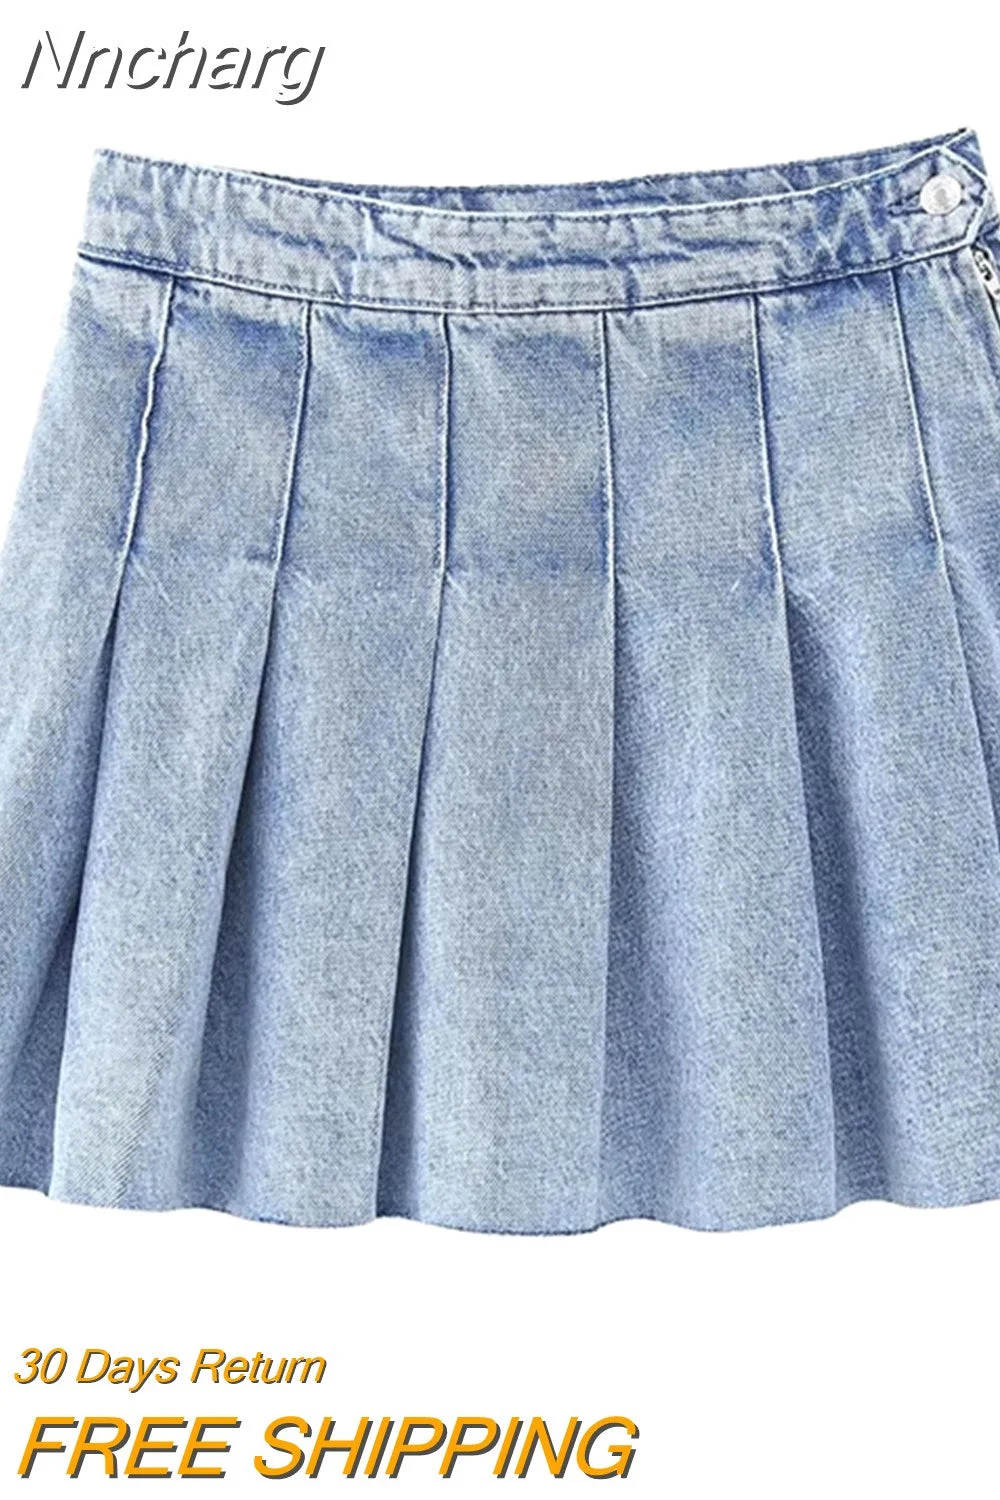 Nncharge TRAF Pleated Denim Mini Skirt Woman Solid Blue Jeans Summer Skirt For Women High Waist Sexy Short Skirts Y2k Streetwear